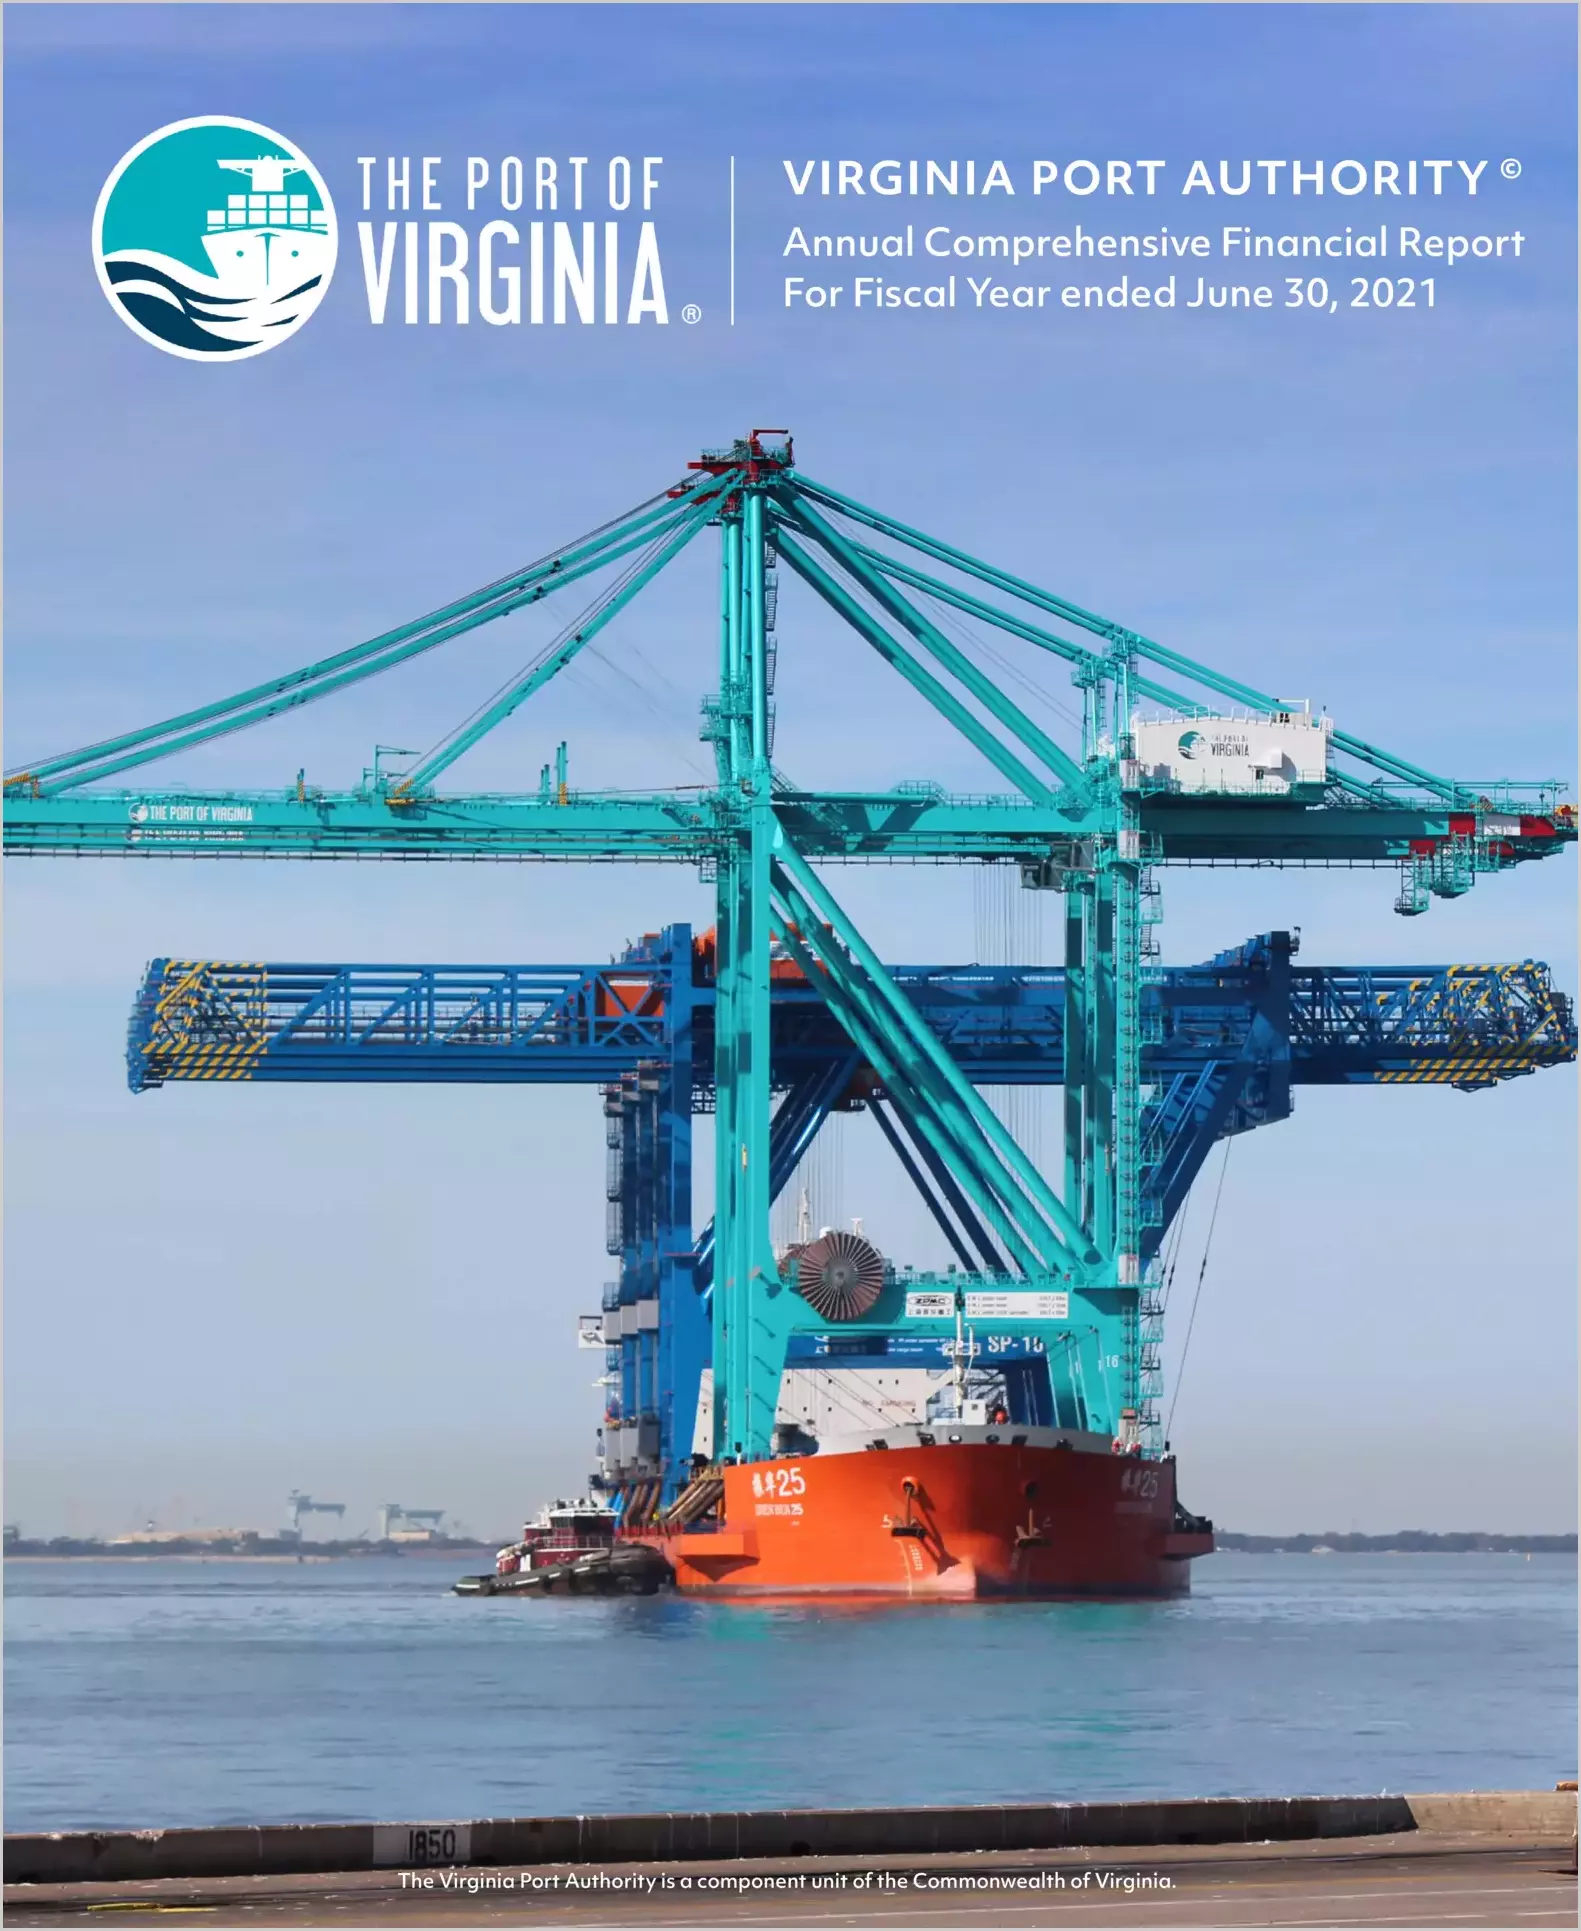 Virginia Port Authority Financial Statements for the year ended June 30, 2021